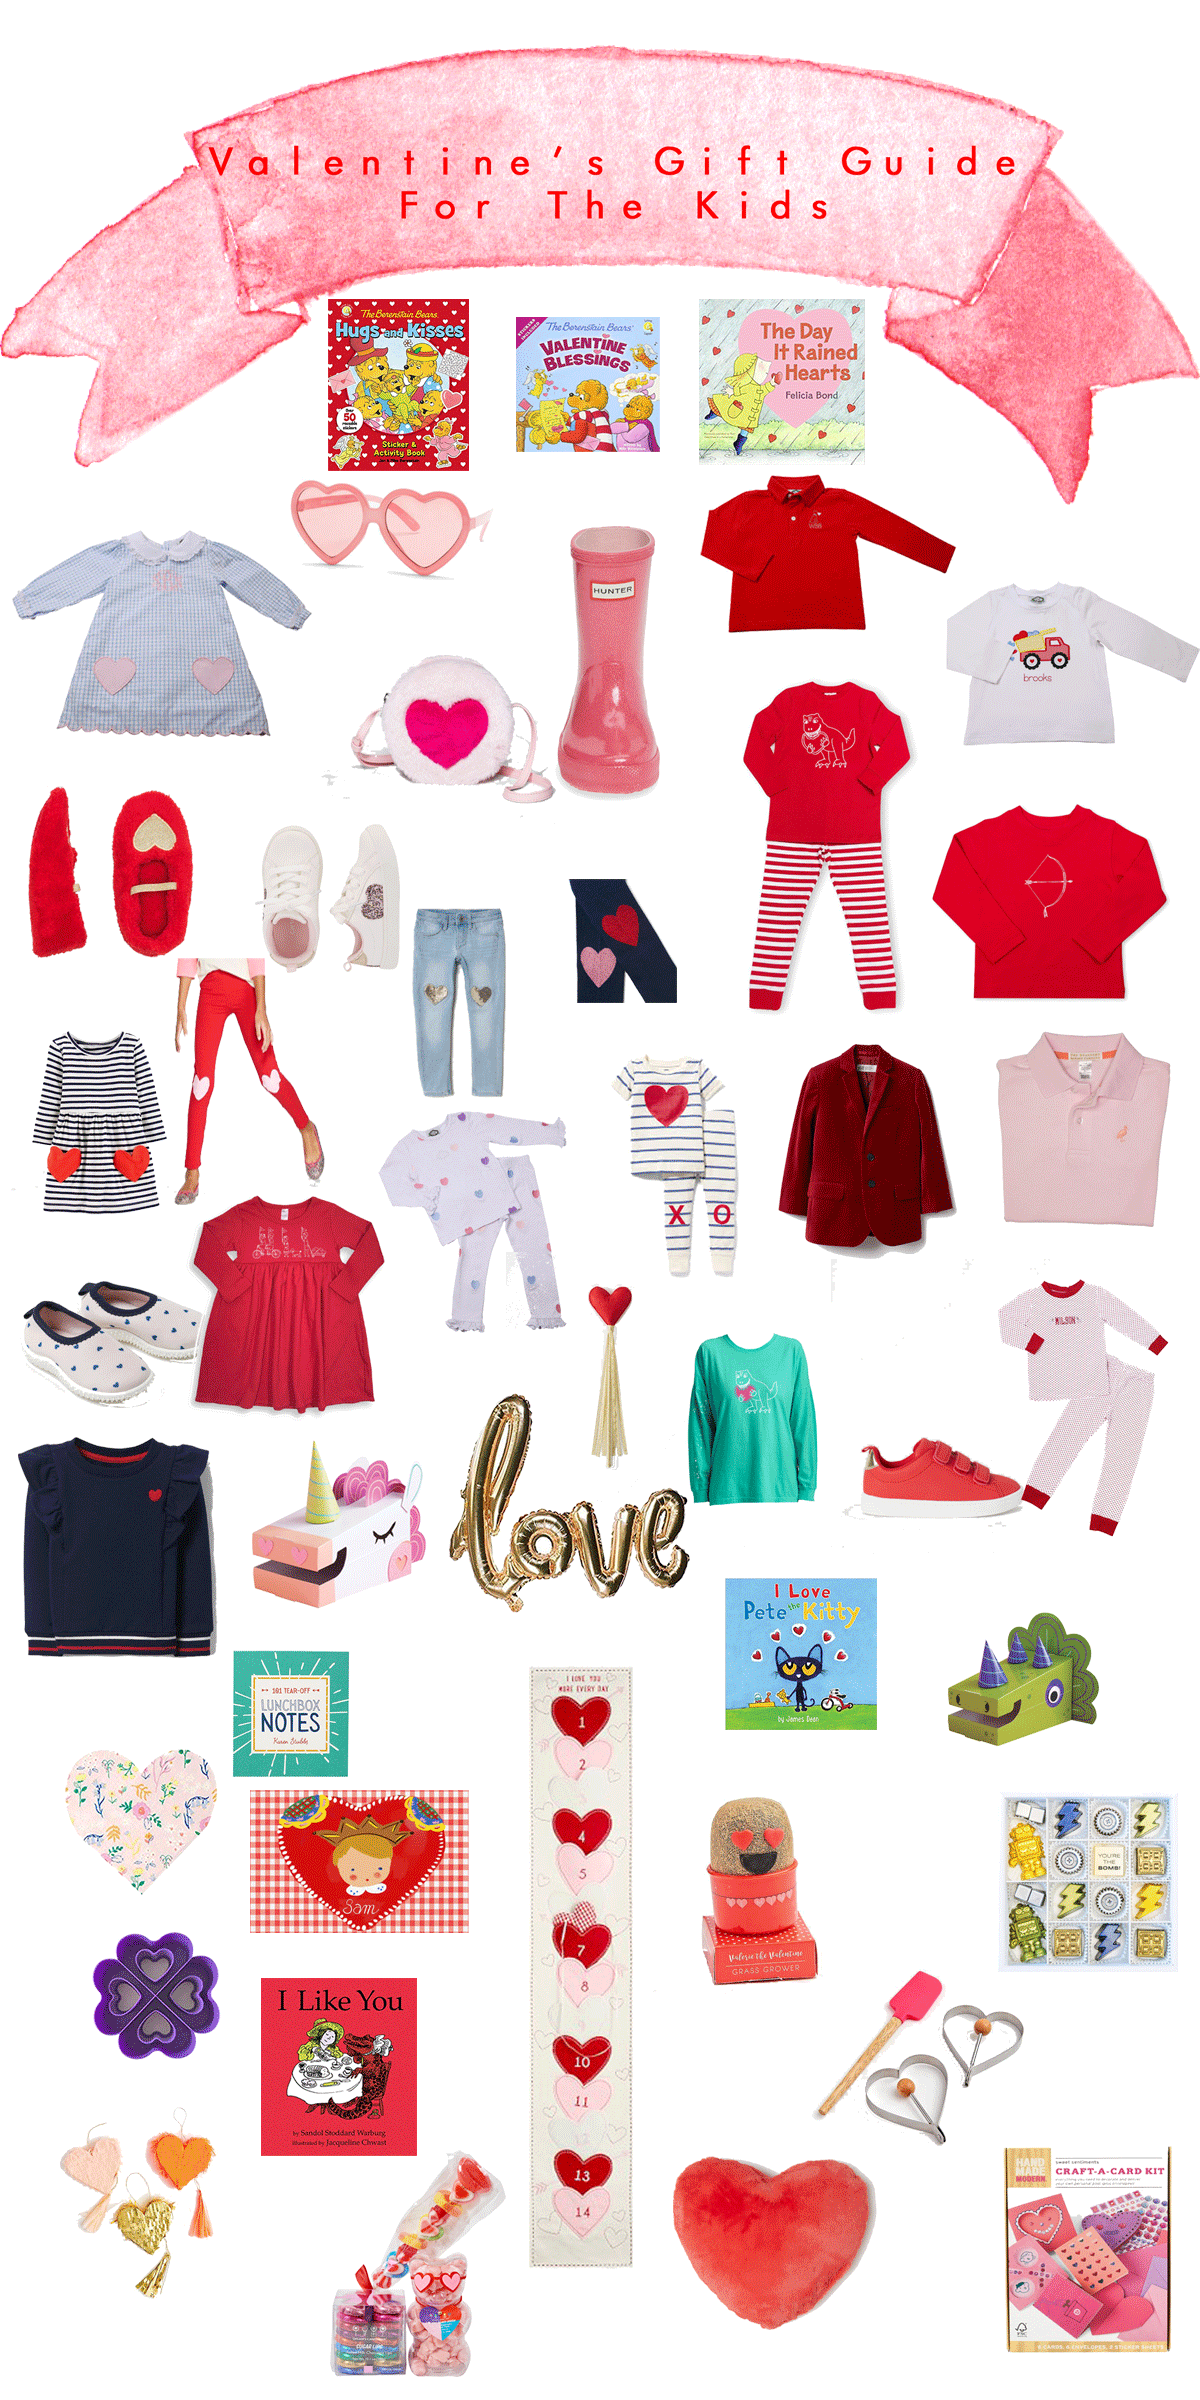 valentine's gift ideas for kids / clothes, toys